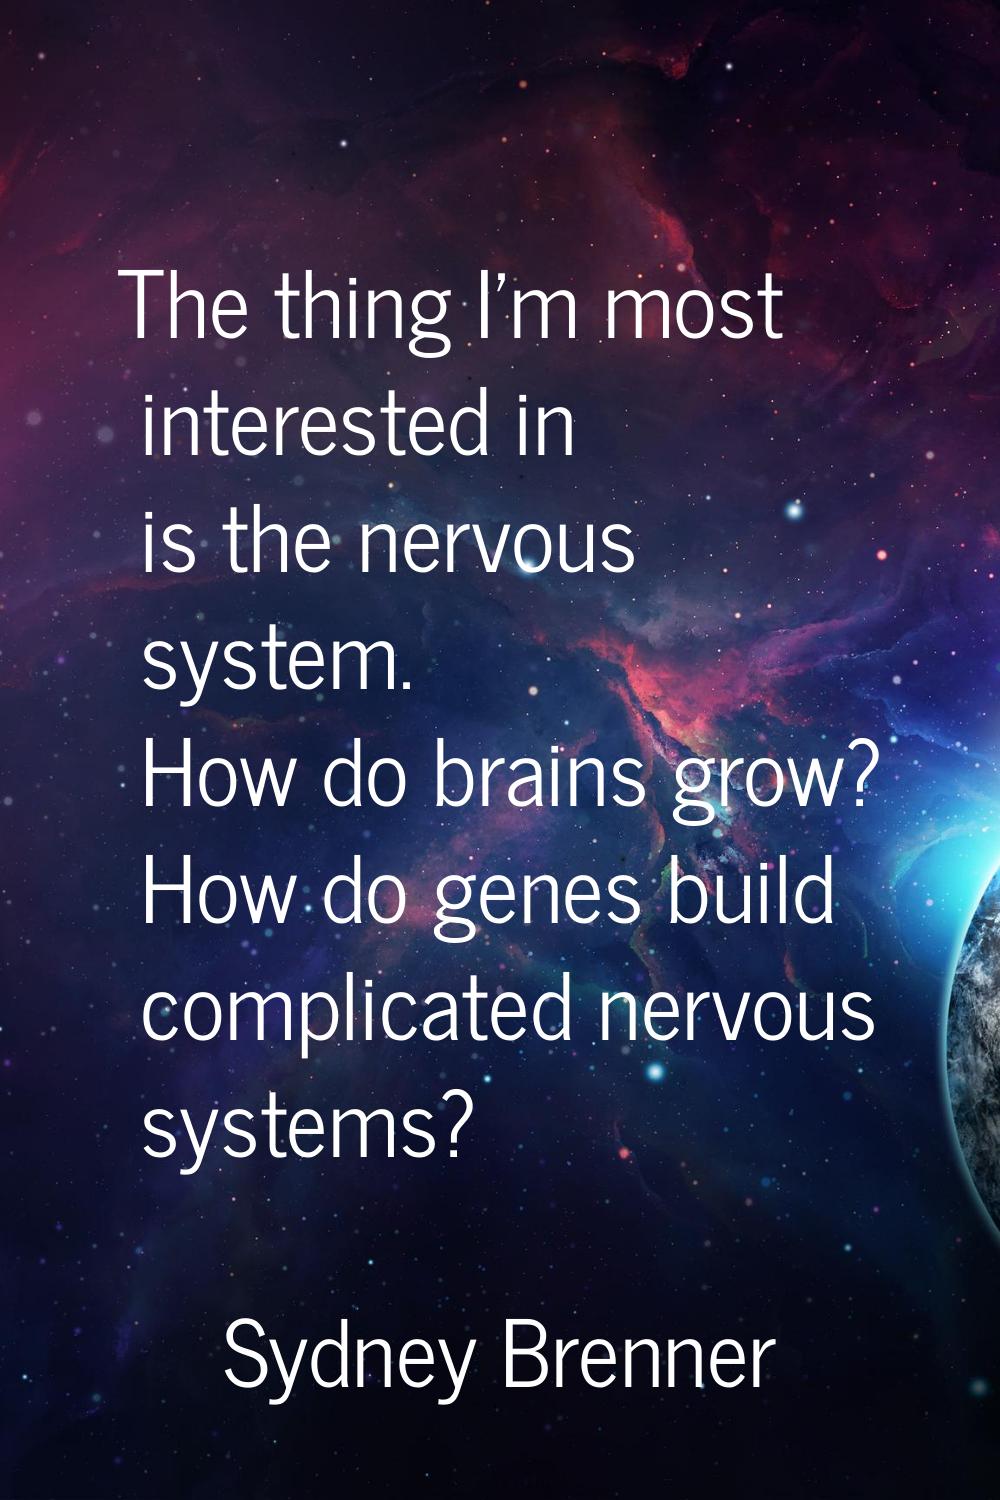 The thing I'm most interested in is the nervous system. How do brains grow? How do genes build comp